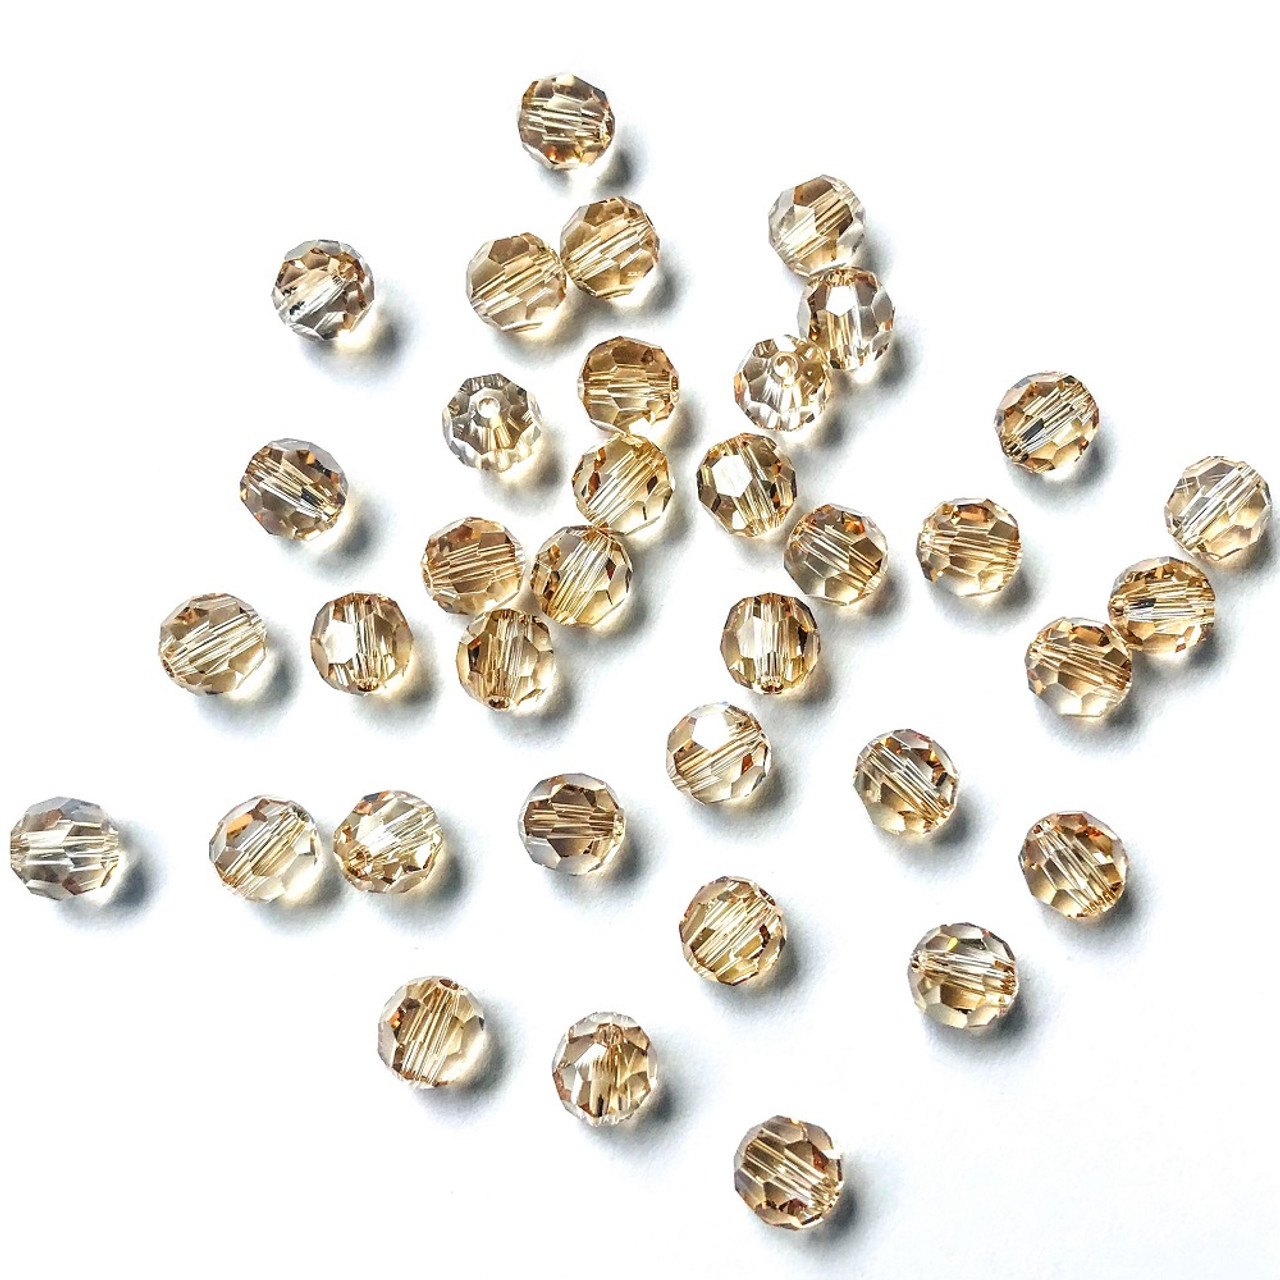 5 Mm ROUND 5000 Swarovski Crystal Beads. Choose Color and Quantity -   Canada